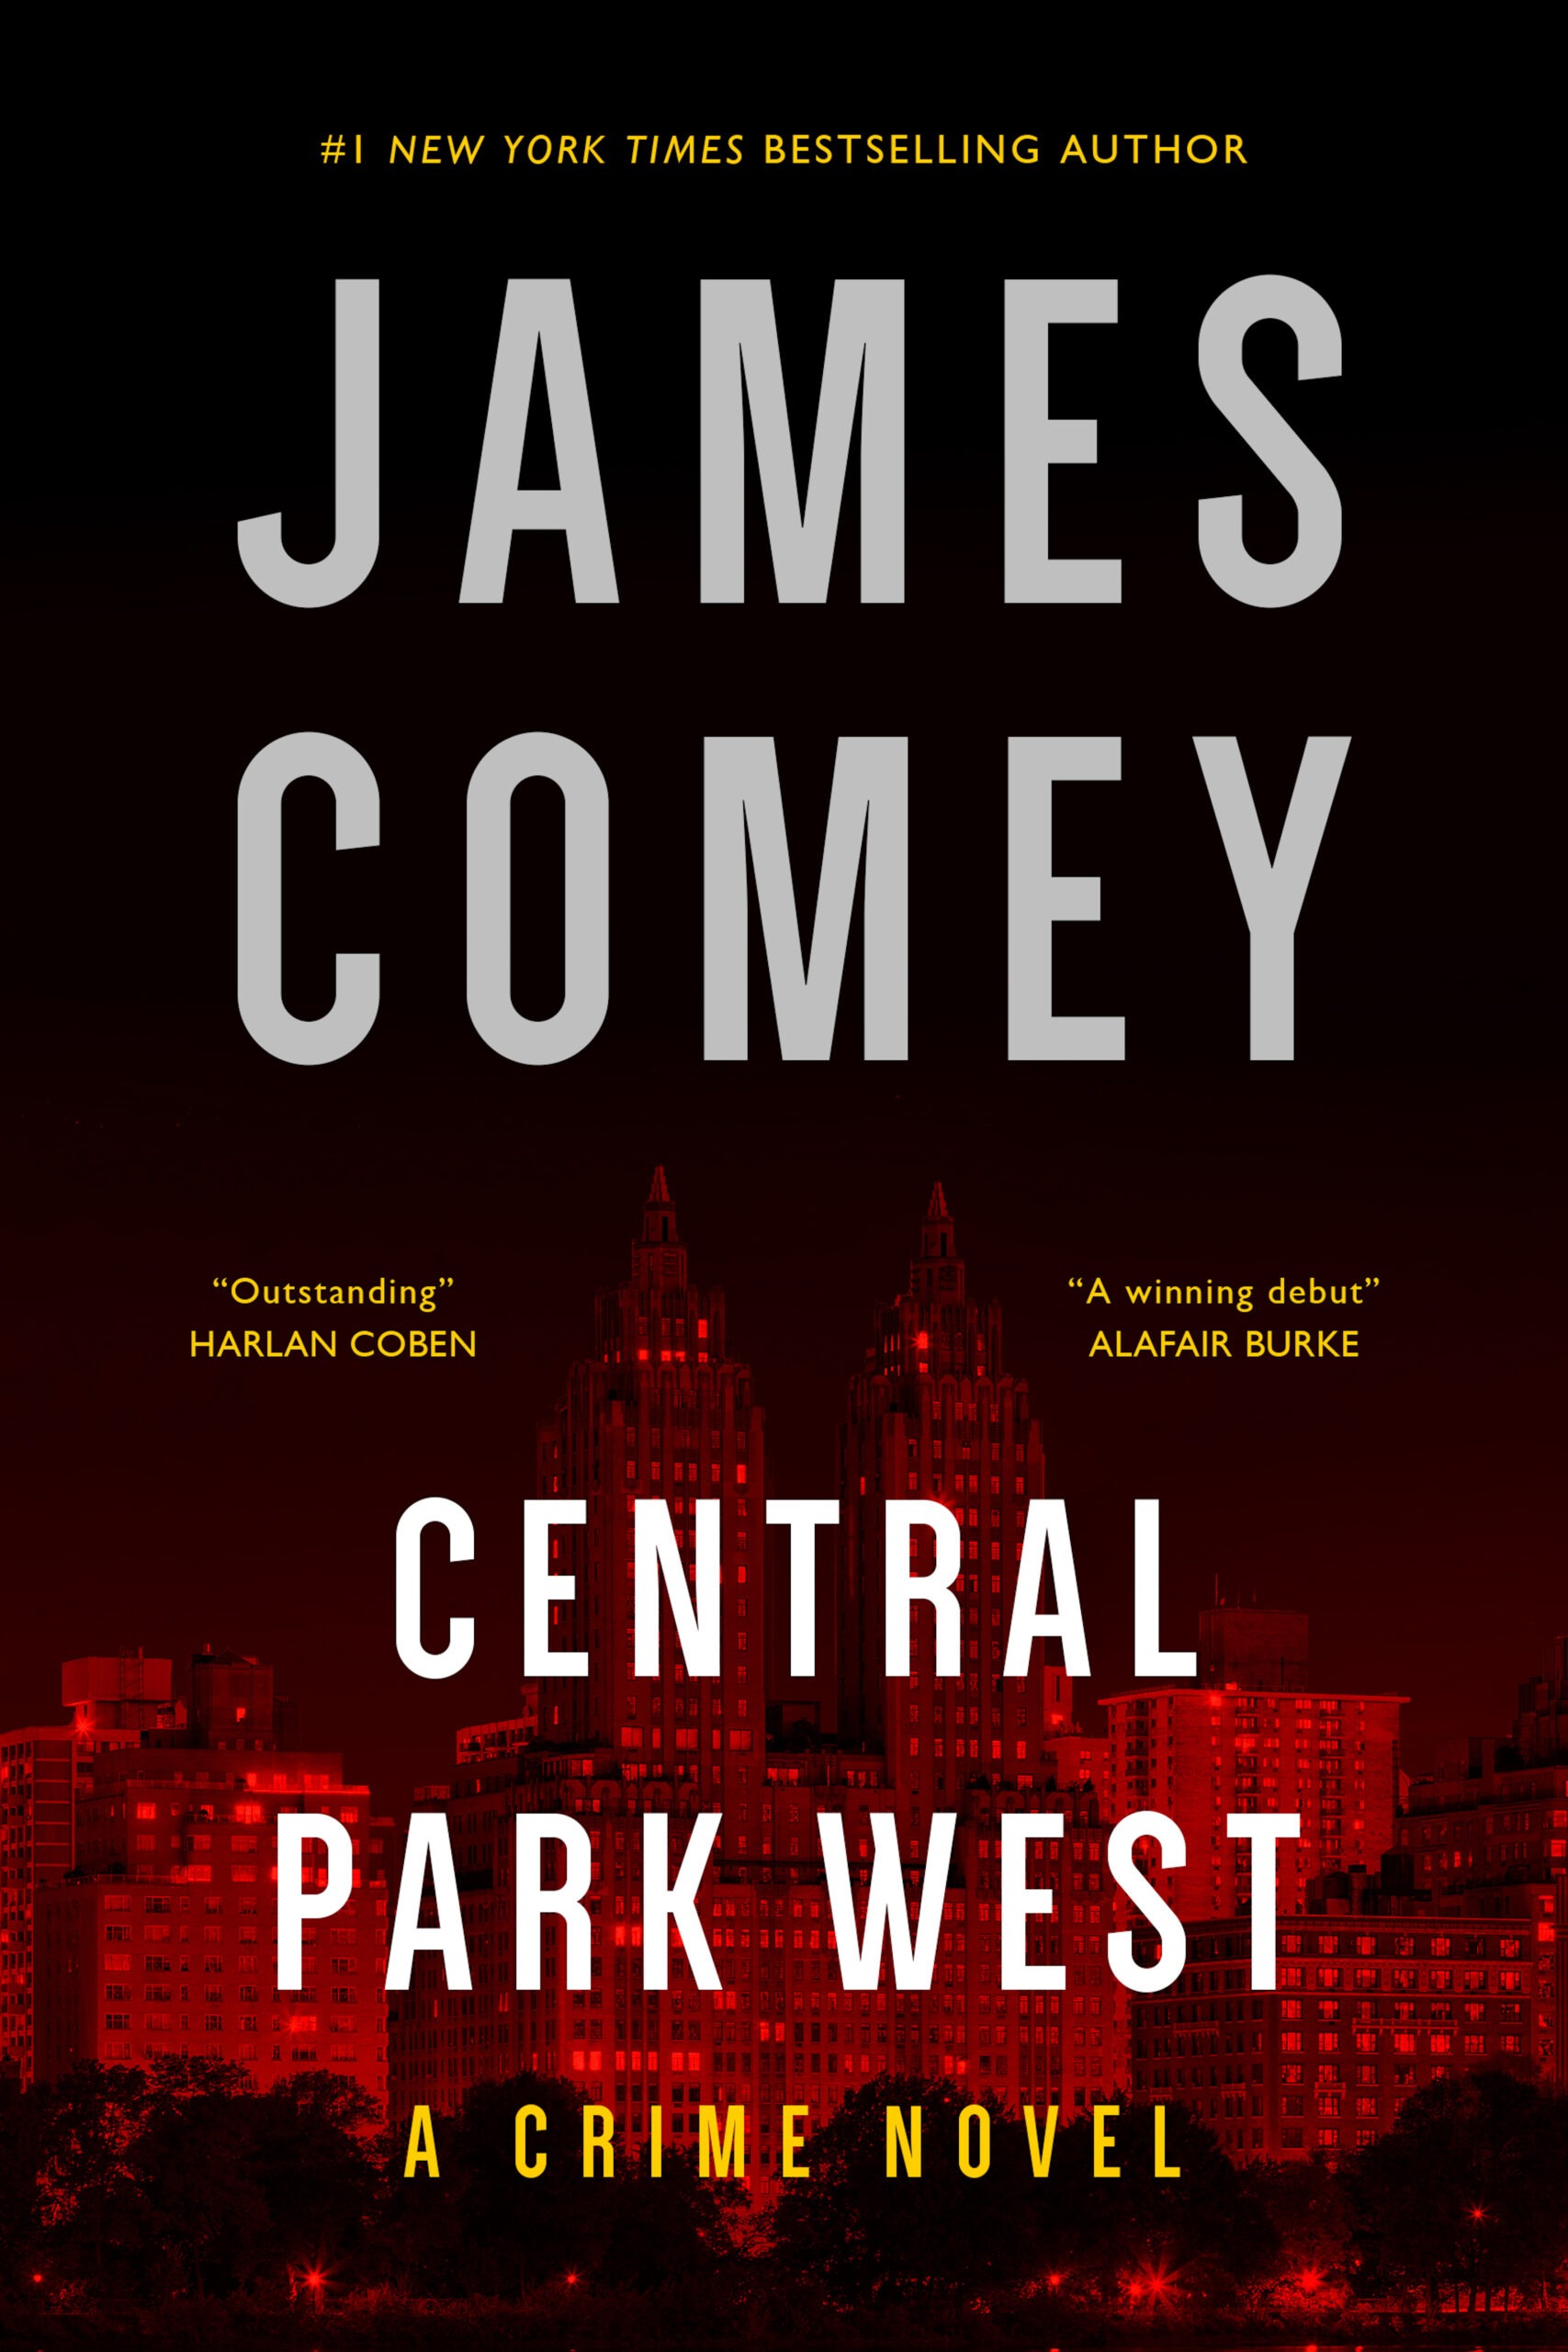 The cover of James Comey's "Central Park West"